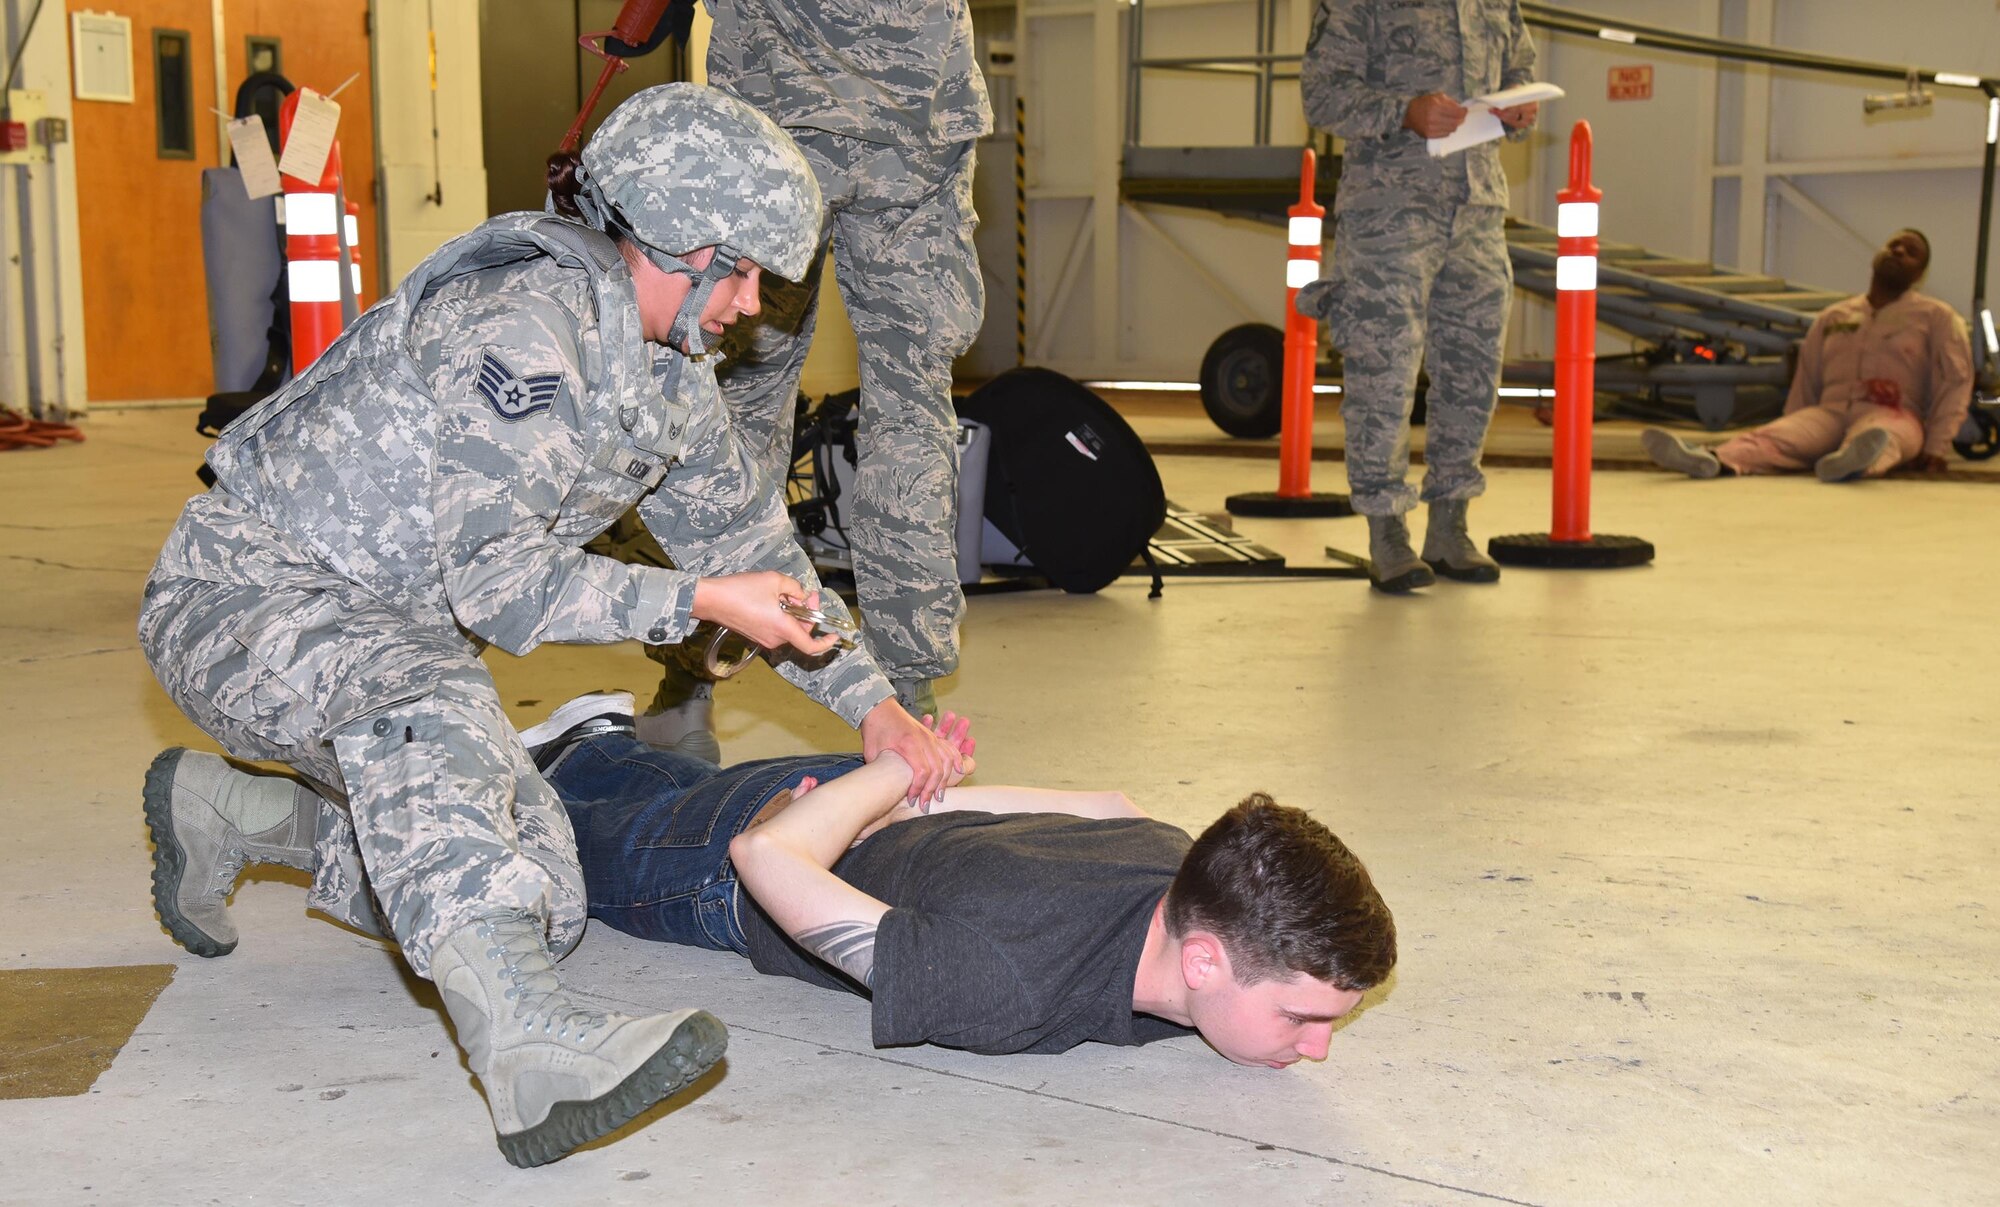 Staff Sgt. Hali Klein, 45th Security Forces Squadron, apprehends a suspect during a joint 920th Rescue Wing and 45th Space Wing active shooter exercise July 25, 2017 in Hangar 750. During the scenario, four Airmen were wounded and three Airmen were killed by a military assailant. The security forces team was the first to respond to the scene, followed by a team of 308th Rescue Squadron pararesceumen and 45th Civil Engineer Squadron firefighters. (U.S. Air Force photo/Tech. Sgt. Lindsey Maurice)